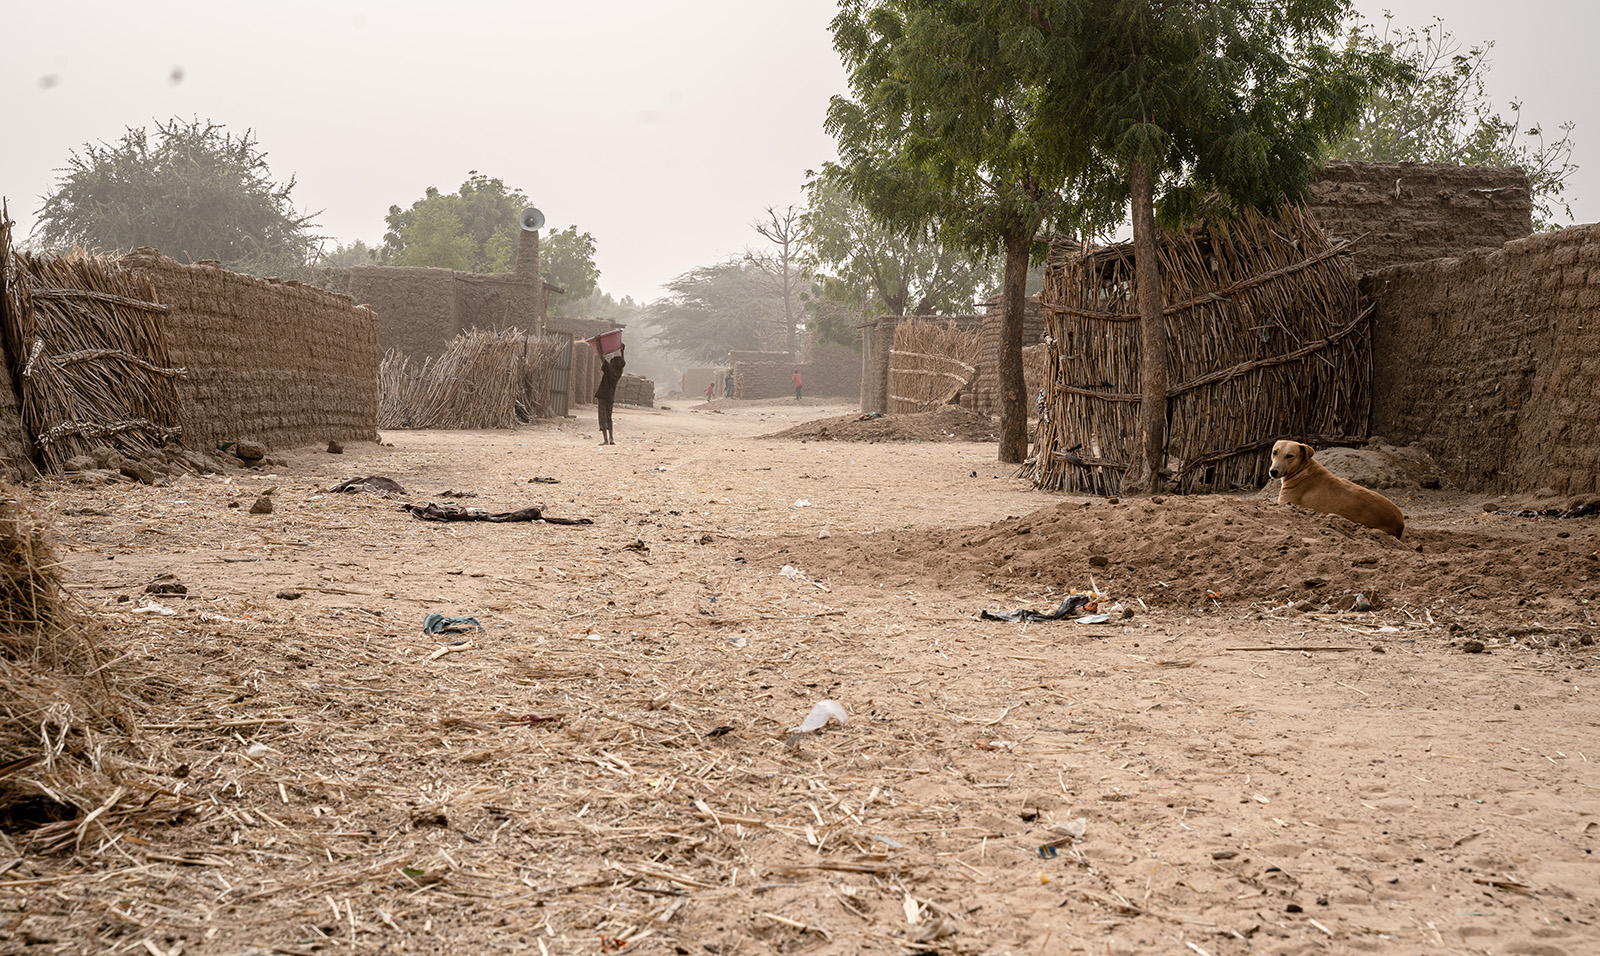 A street in the village of Dogon Marké, in the health district of Mirriah in Niger.